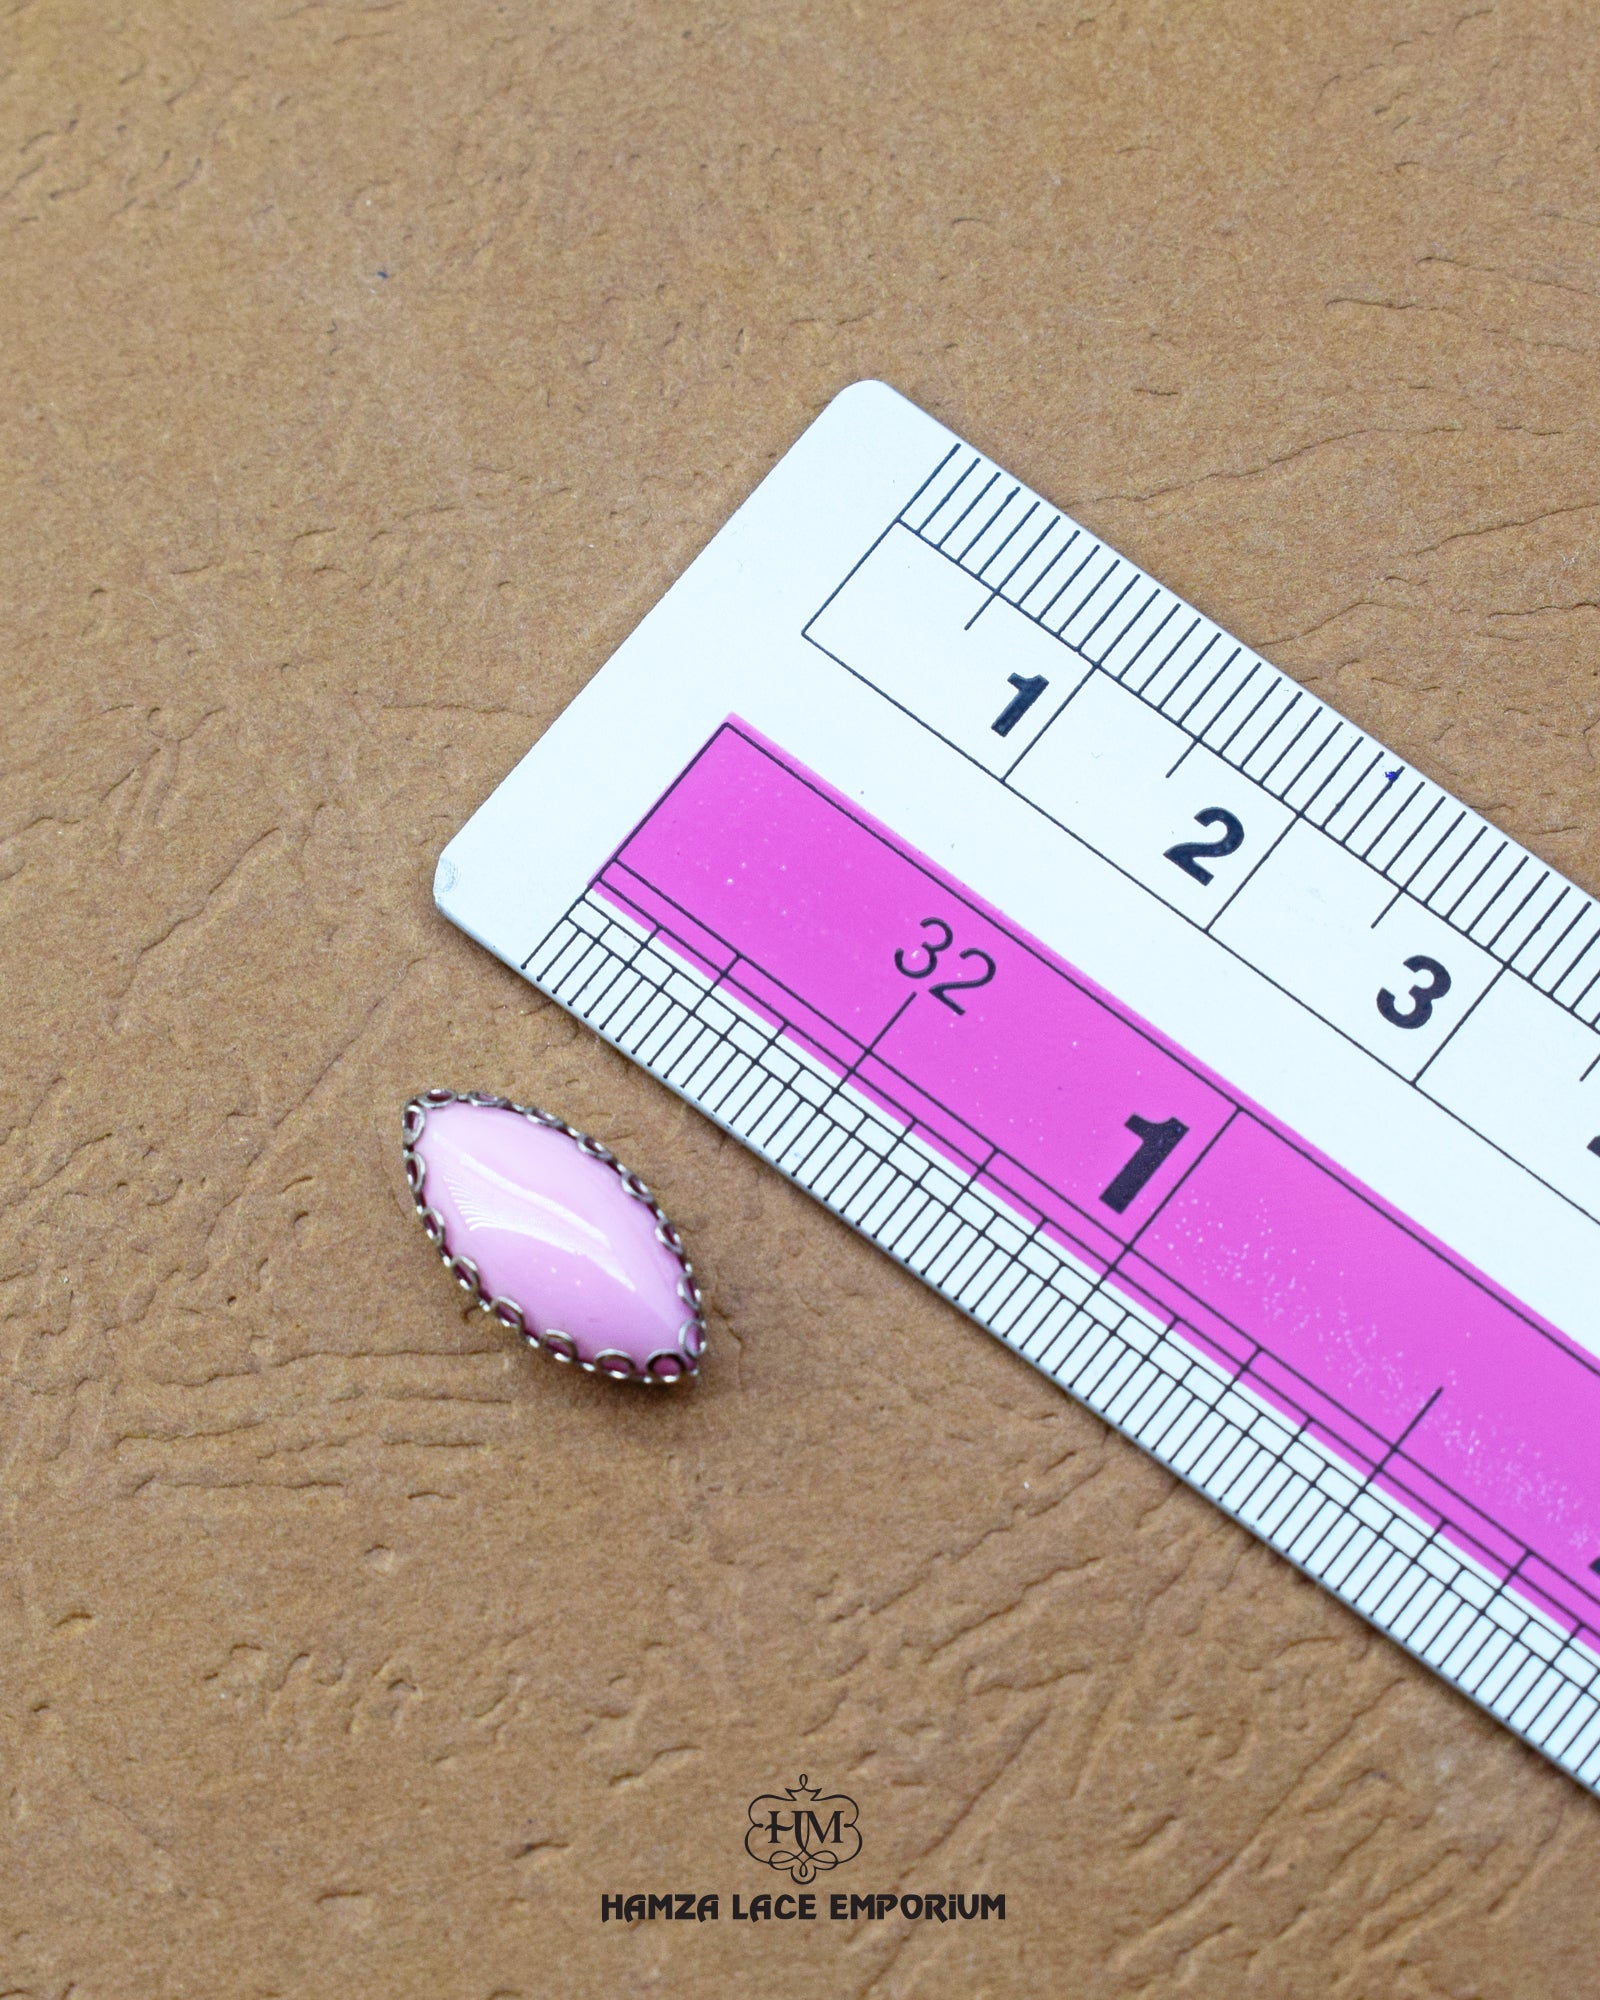 The size of the 'Drop Shape Metal Button MB566' is indicated using a ruler.